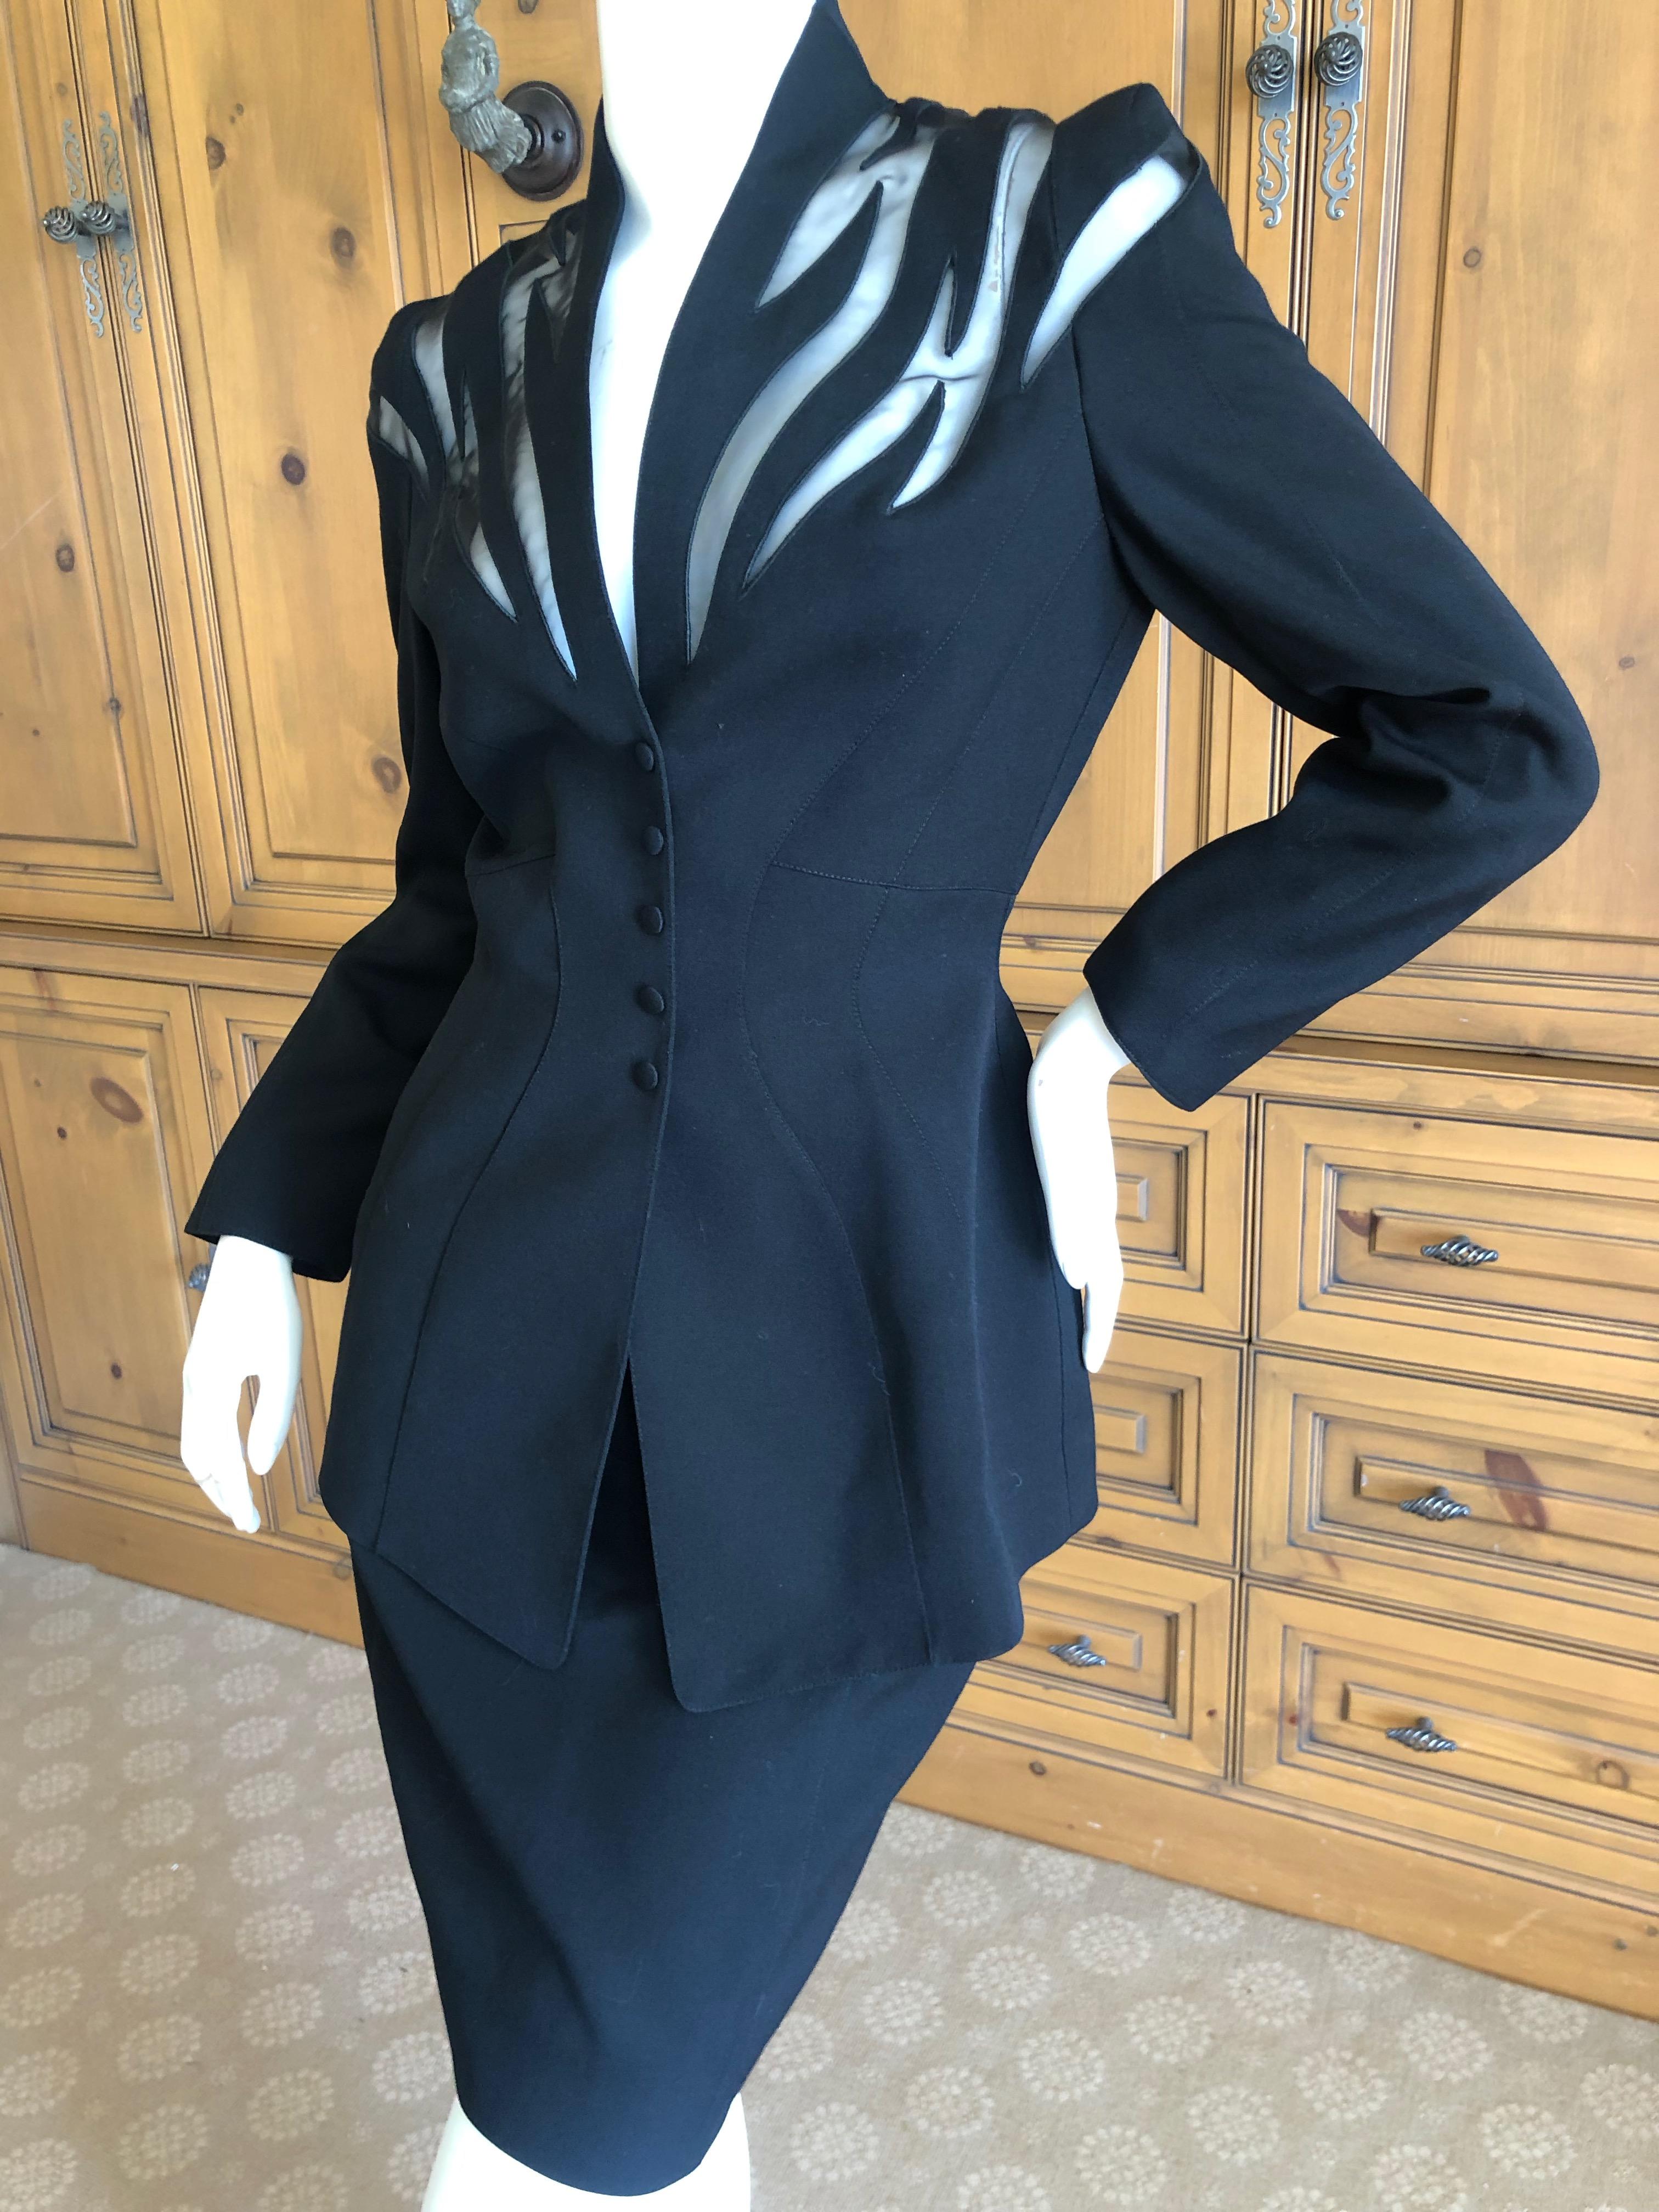 Thierry Mugler Vintage 1980's Black Peplum Suit with Sheer Flame Pattern Details For Sale 1